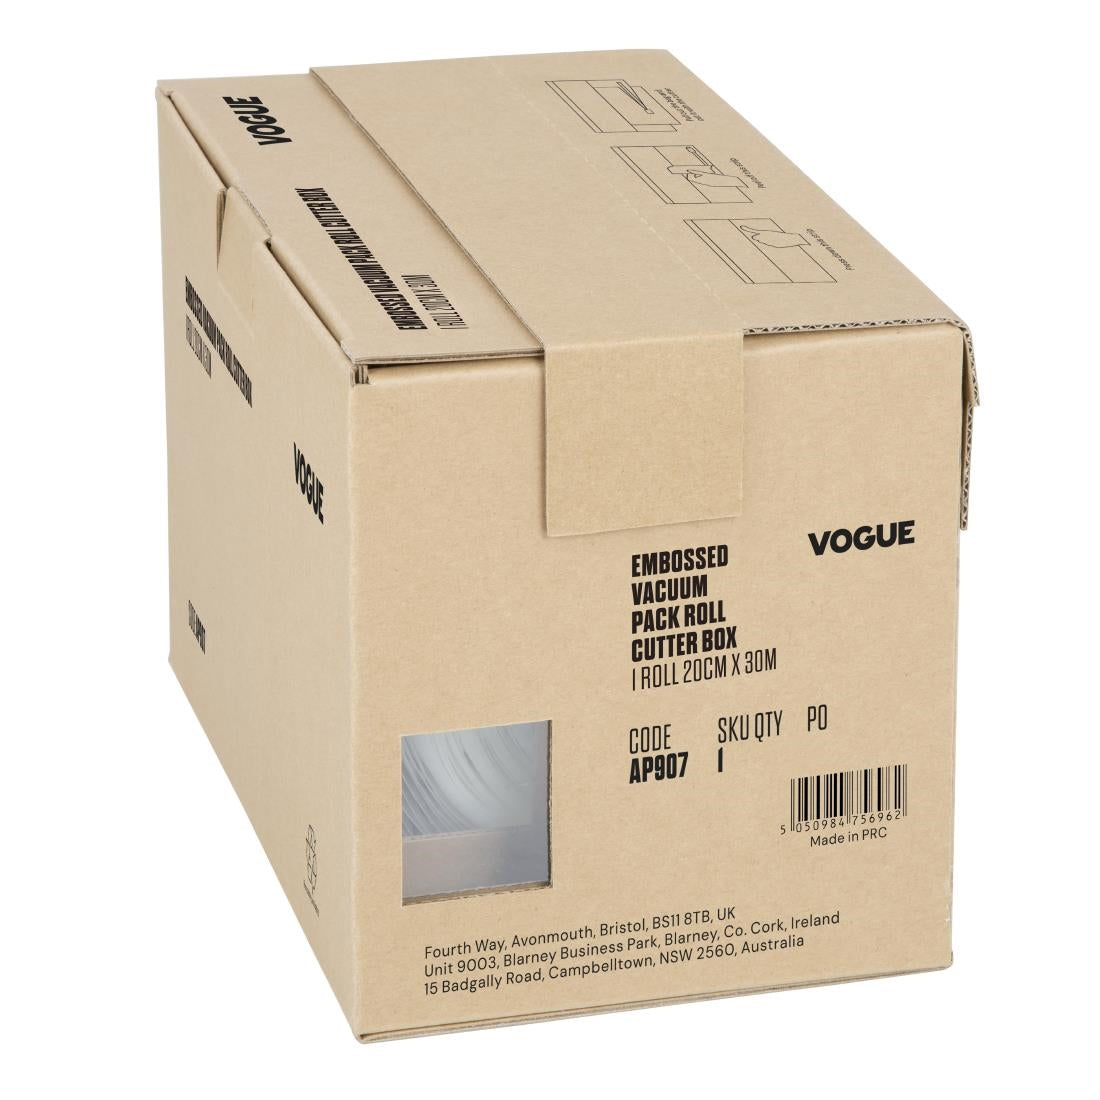 AP907 Vogue Vacuum Pack Roll with Cutter Box (Embossed) 200mm width